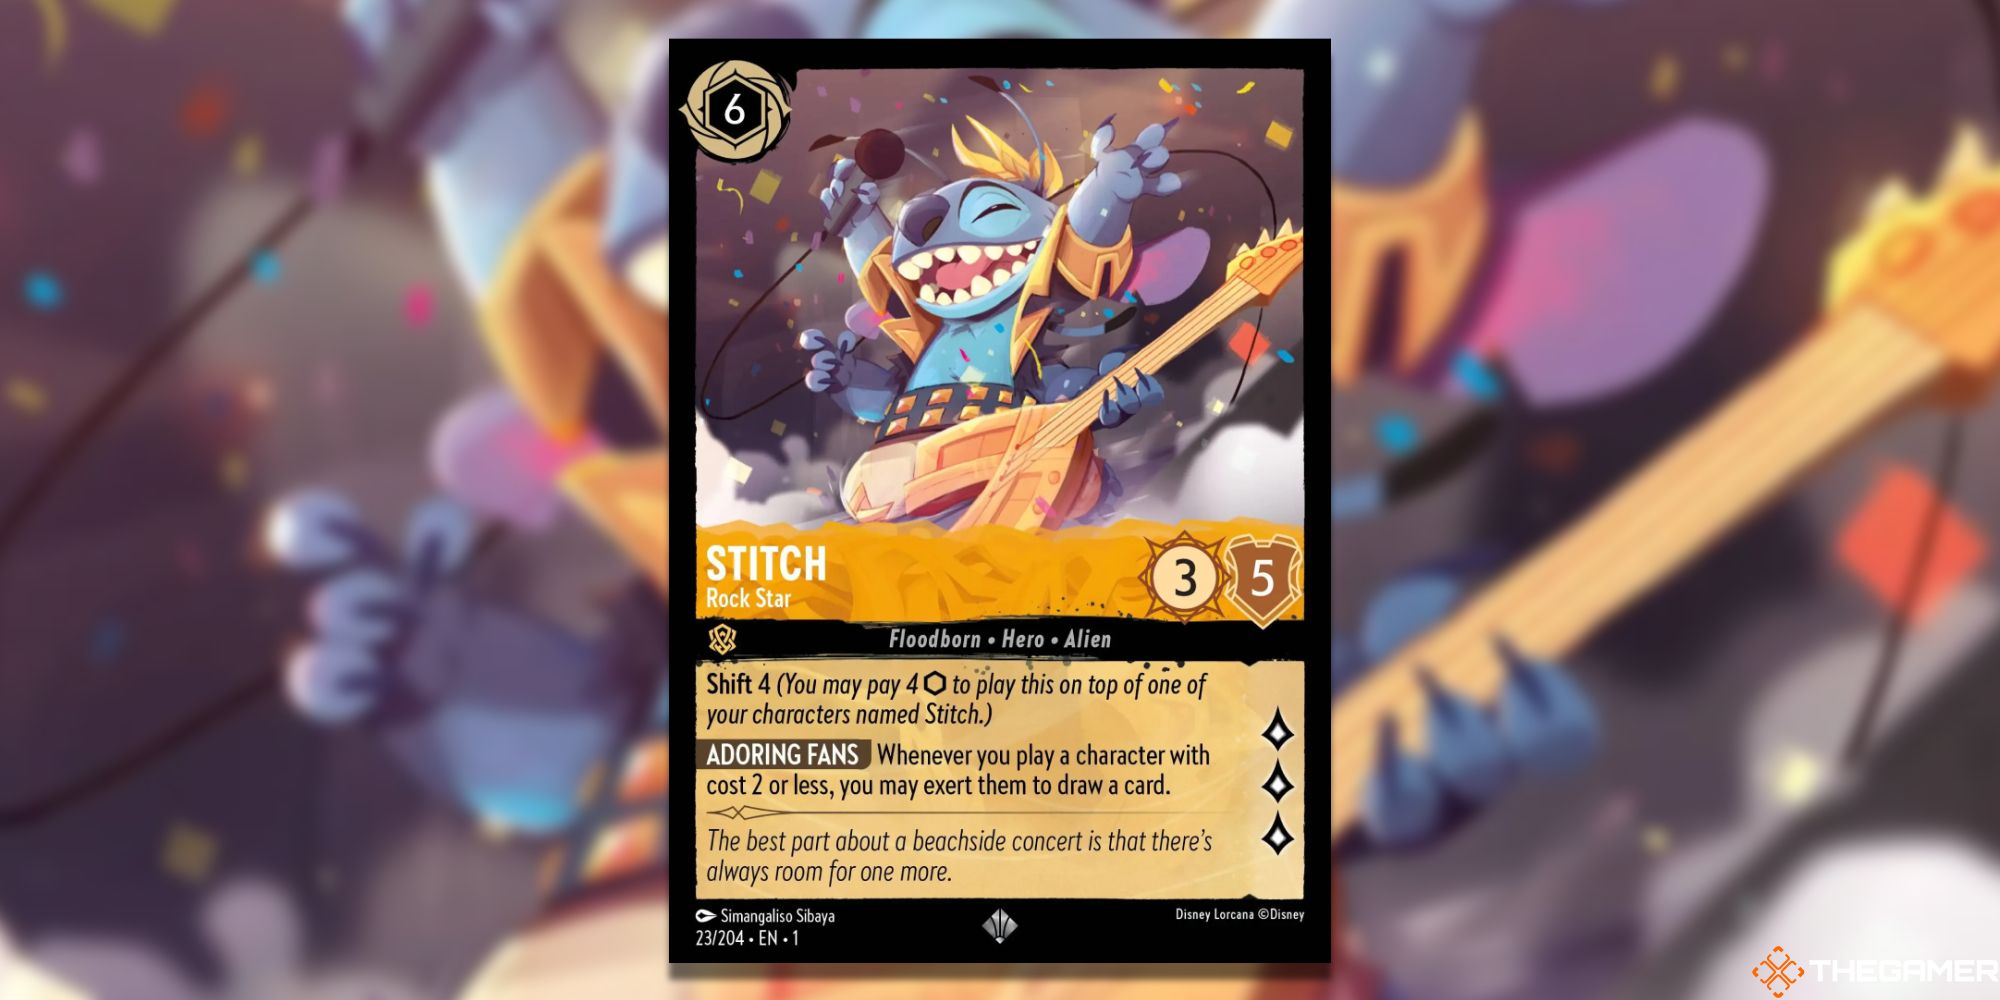 Image of the Stitch, Rock Star card in Magic: The Gathering, with artby Simangaliso Sibaya